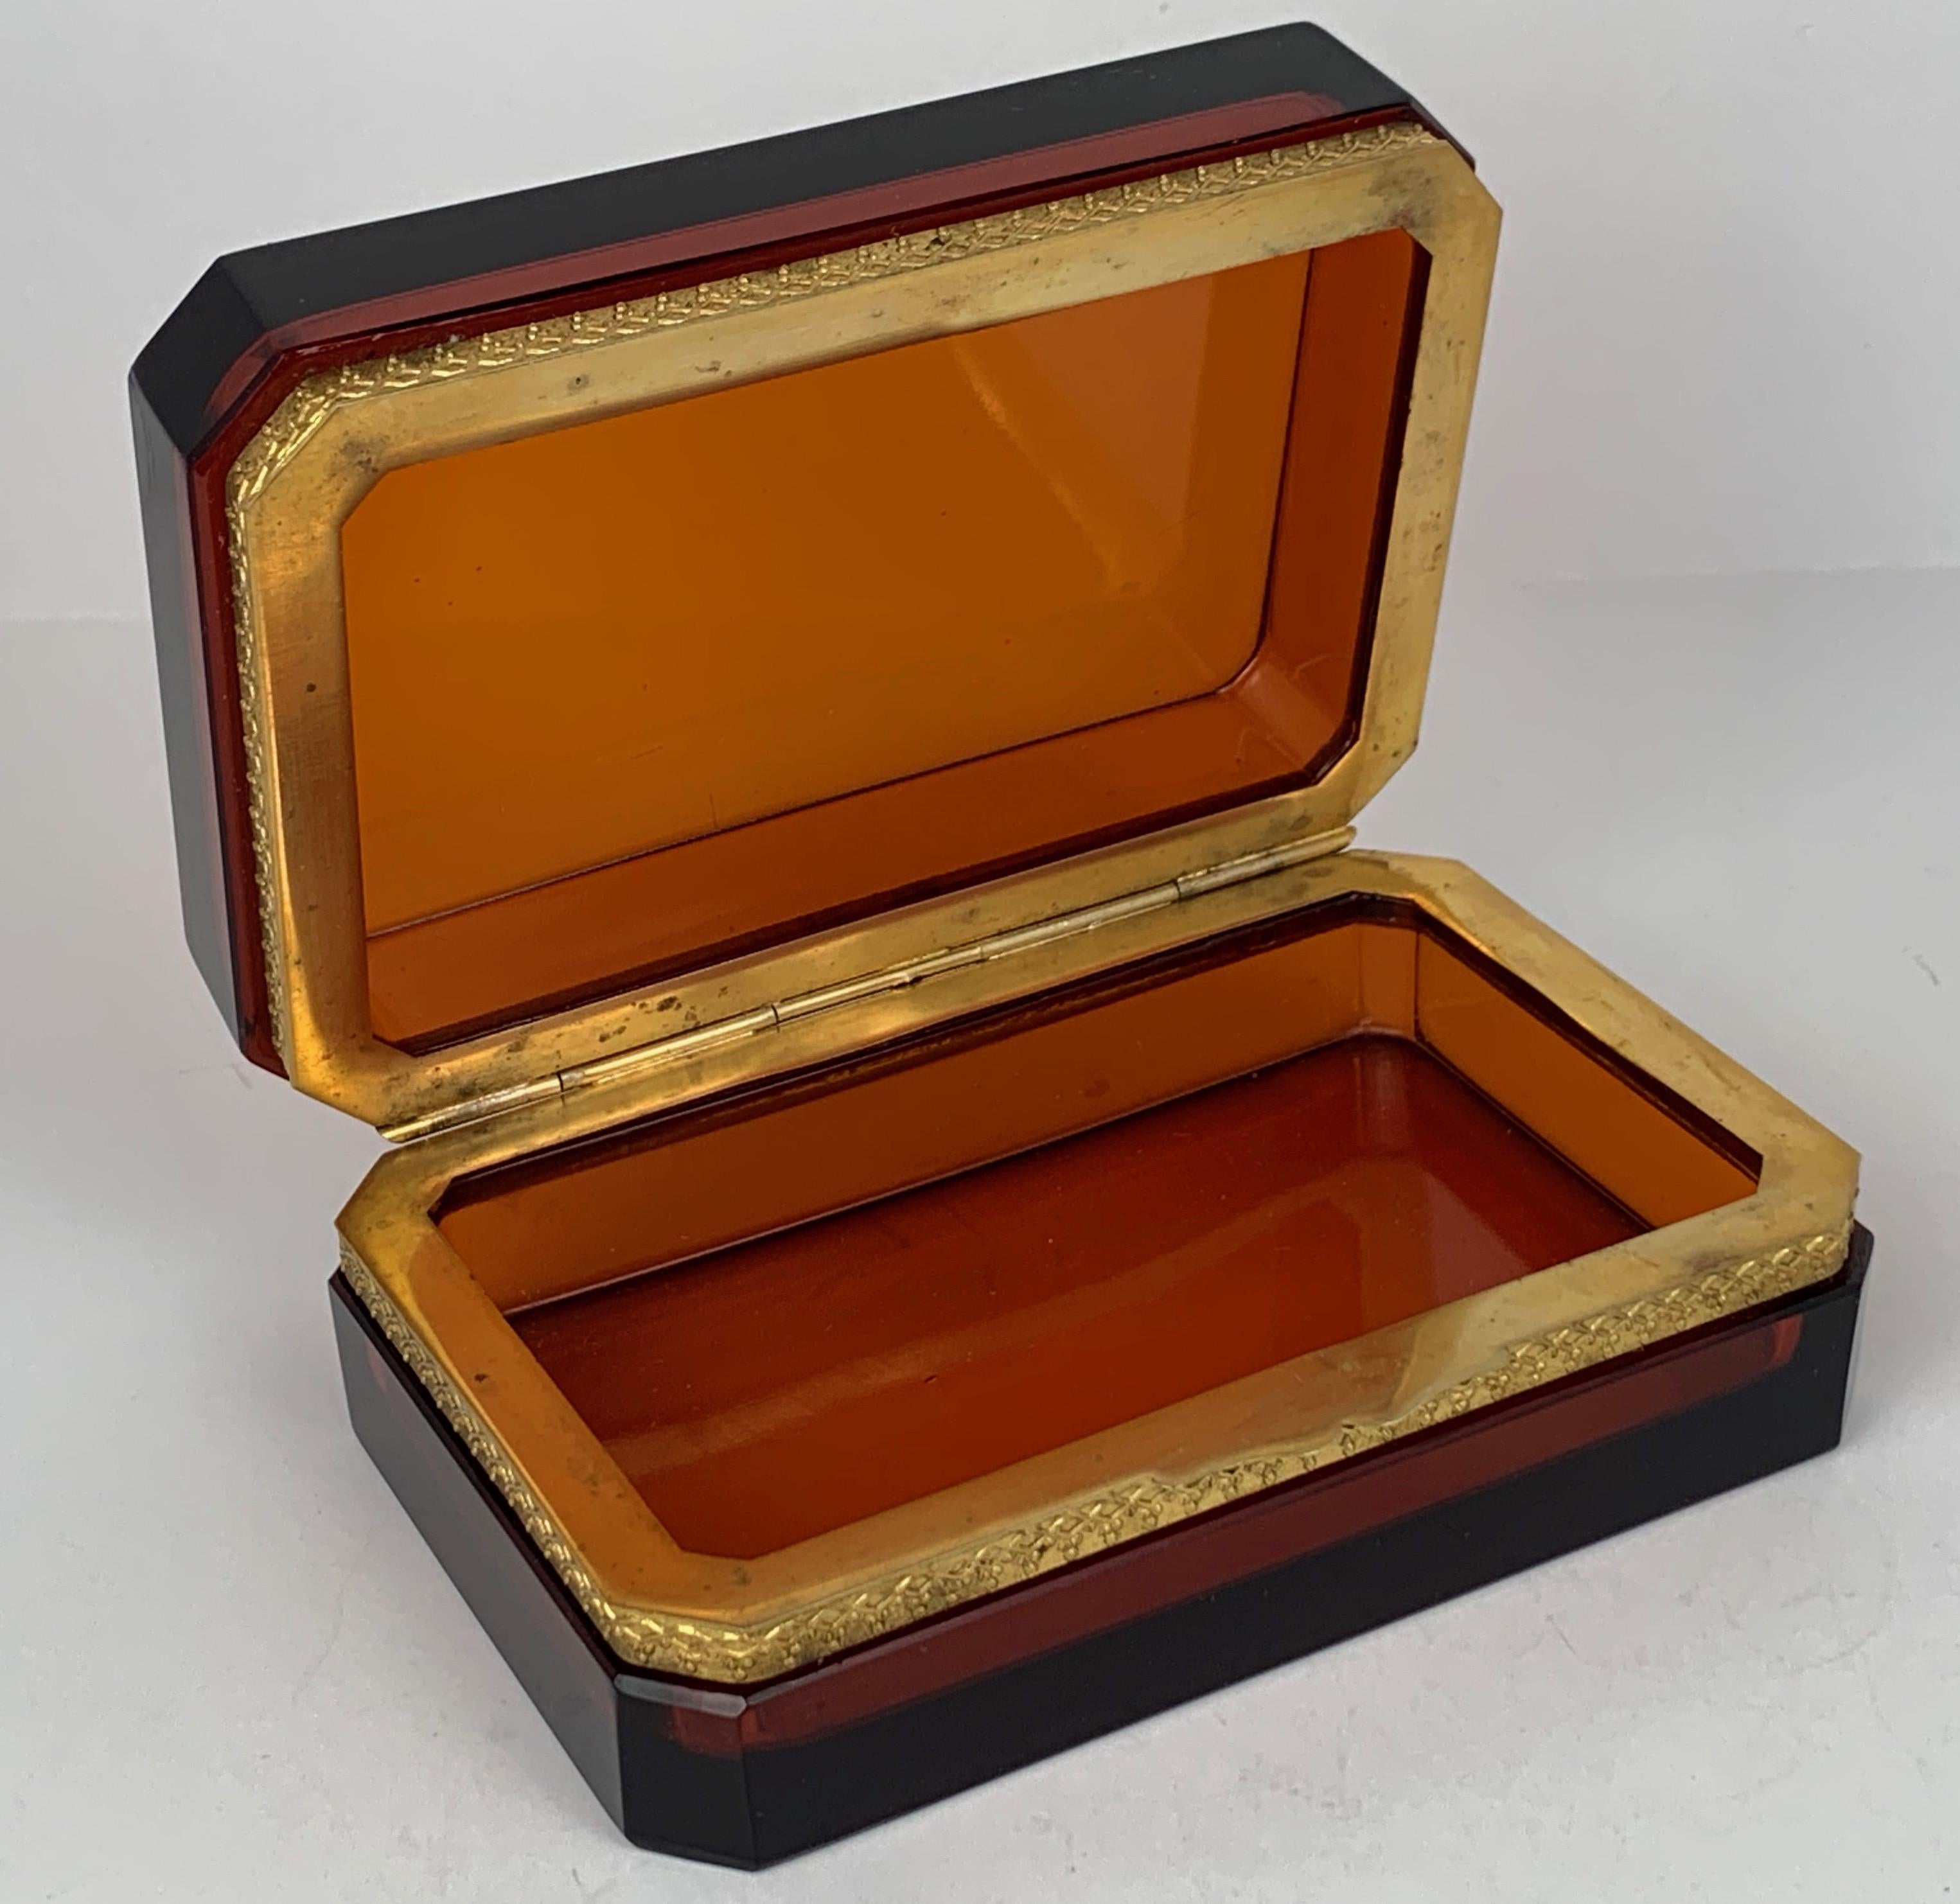 Dark amber hinged glass box with gilt frame by Cenedese, Murano, Italy. Rich amber color accented with high gold tones and heavy beveled glass. Suited to hold most anything or just looking great on a table catching light in any room.